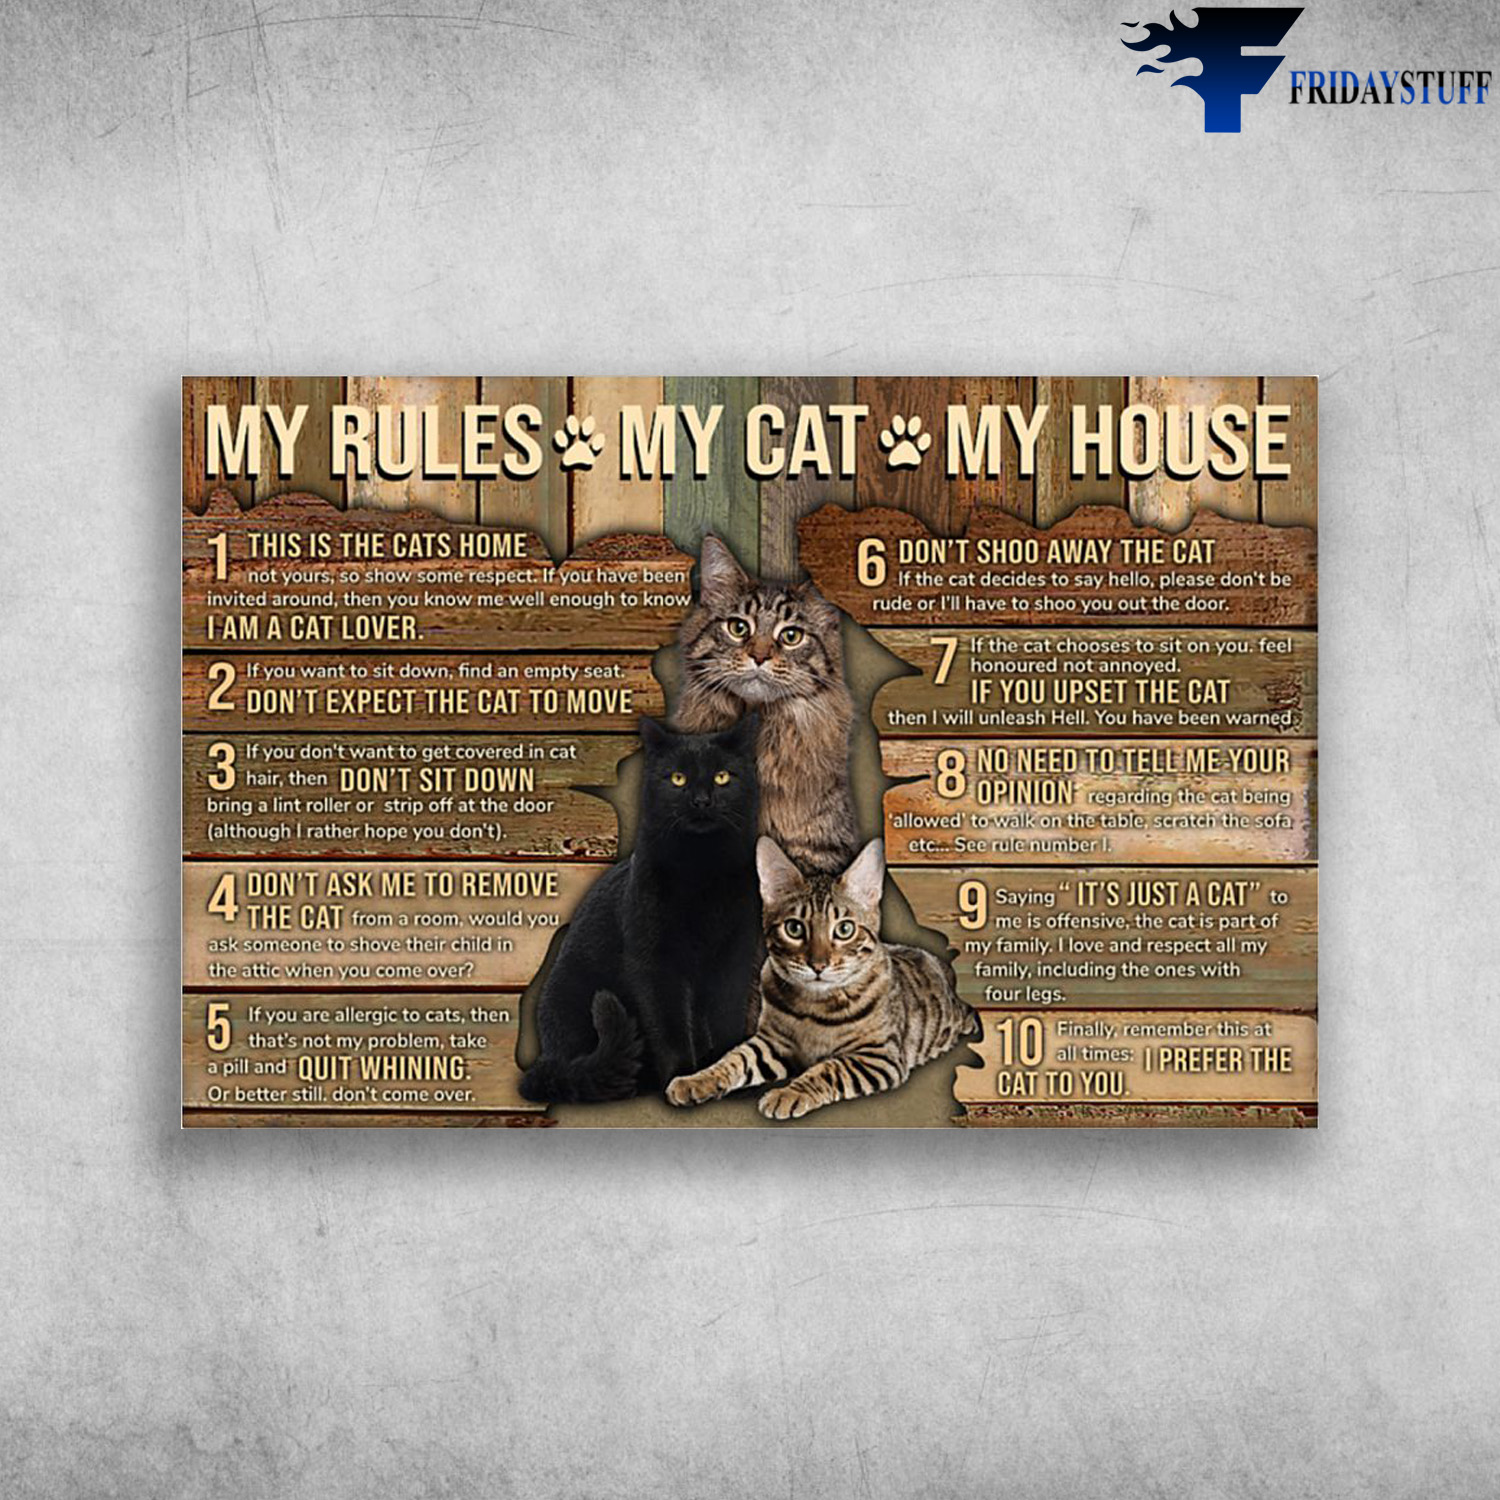 My Rules, My Cat, My House - This Is The Cats Home, Don't Expect The Cat To Move, Don't Sit Down